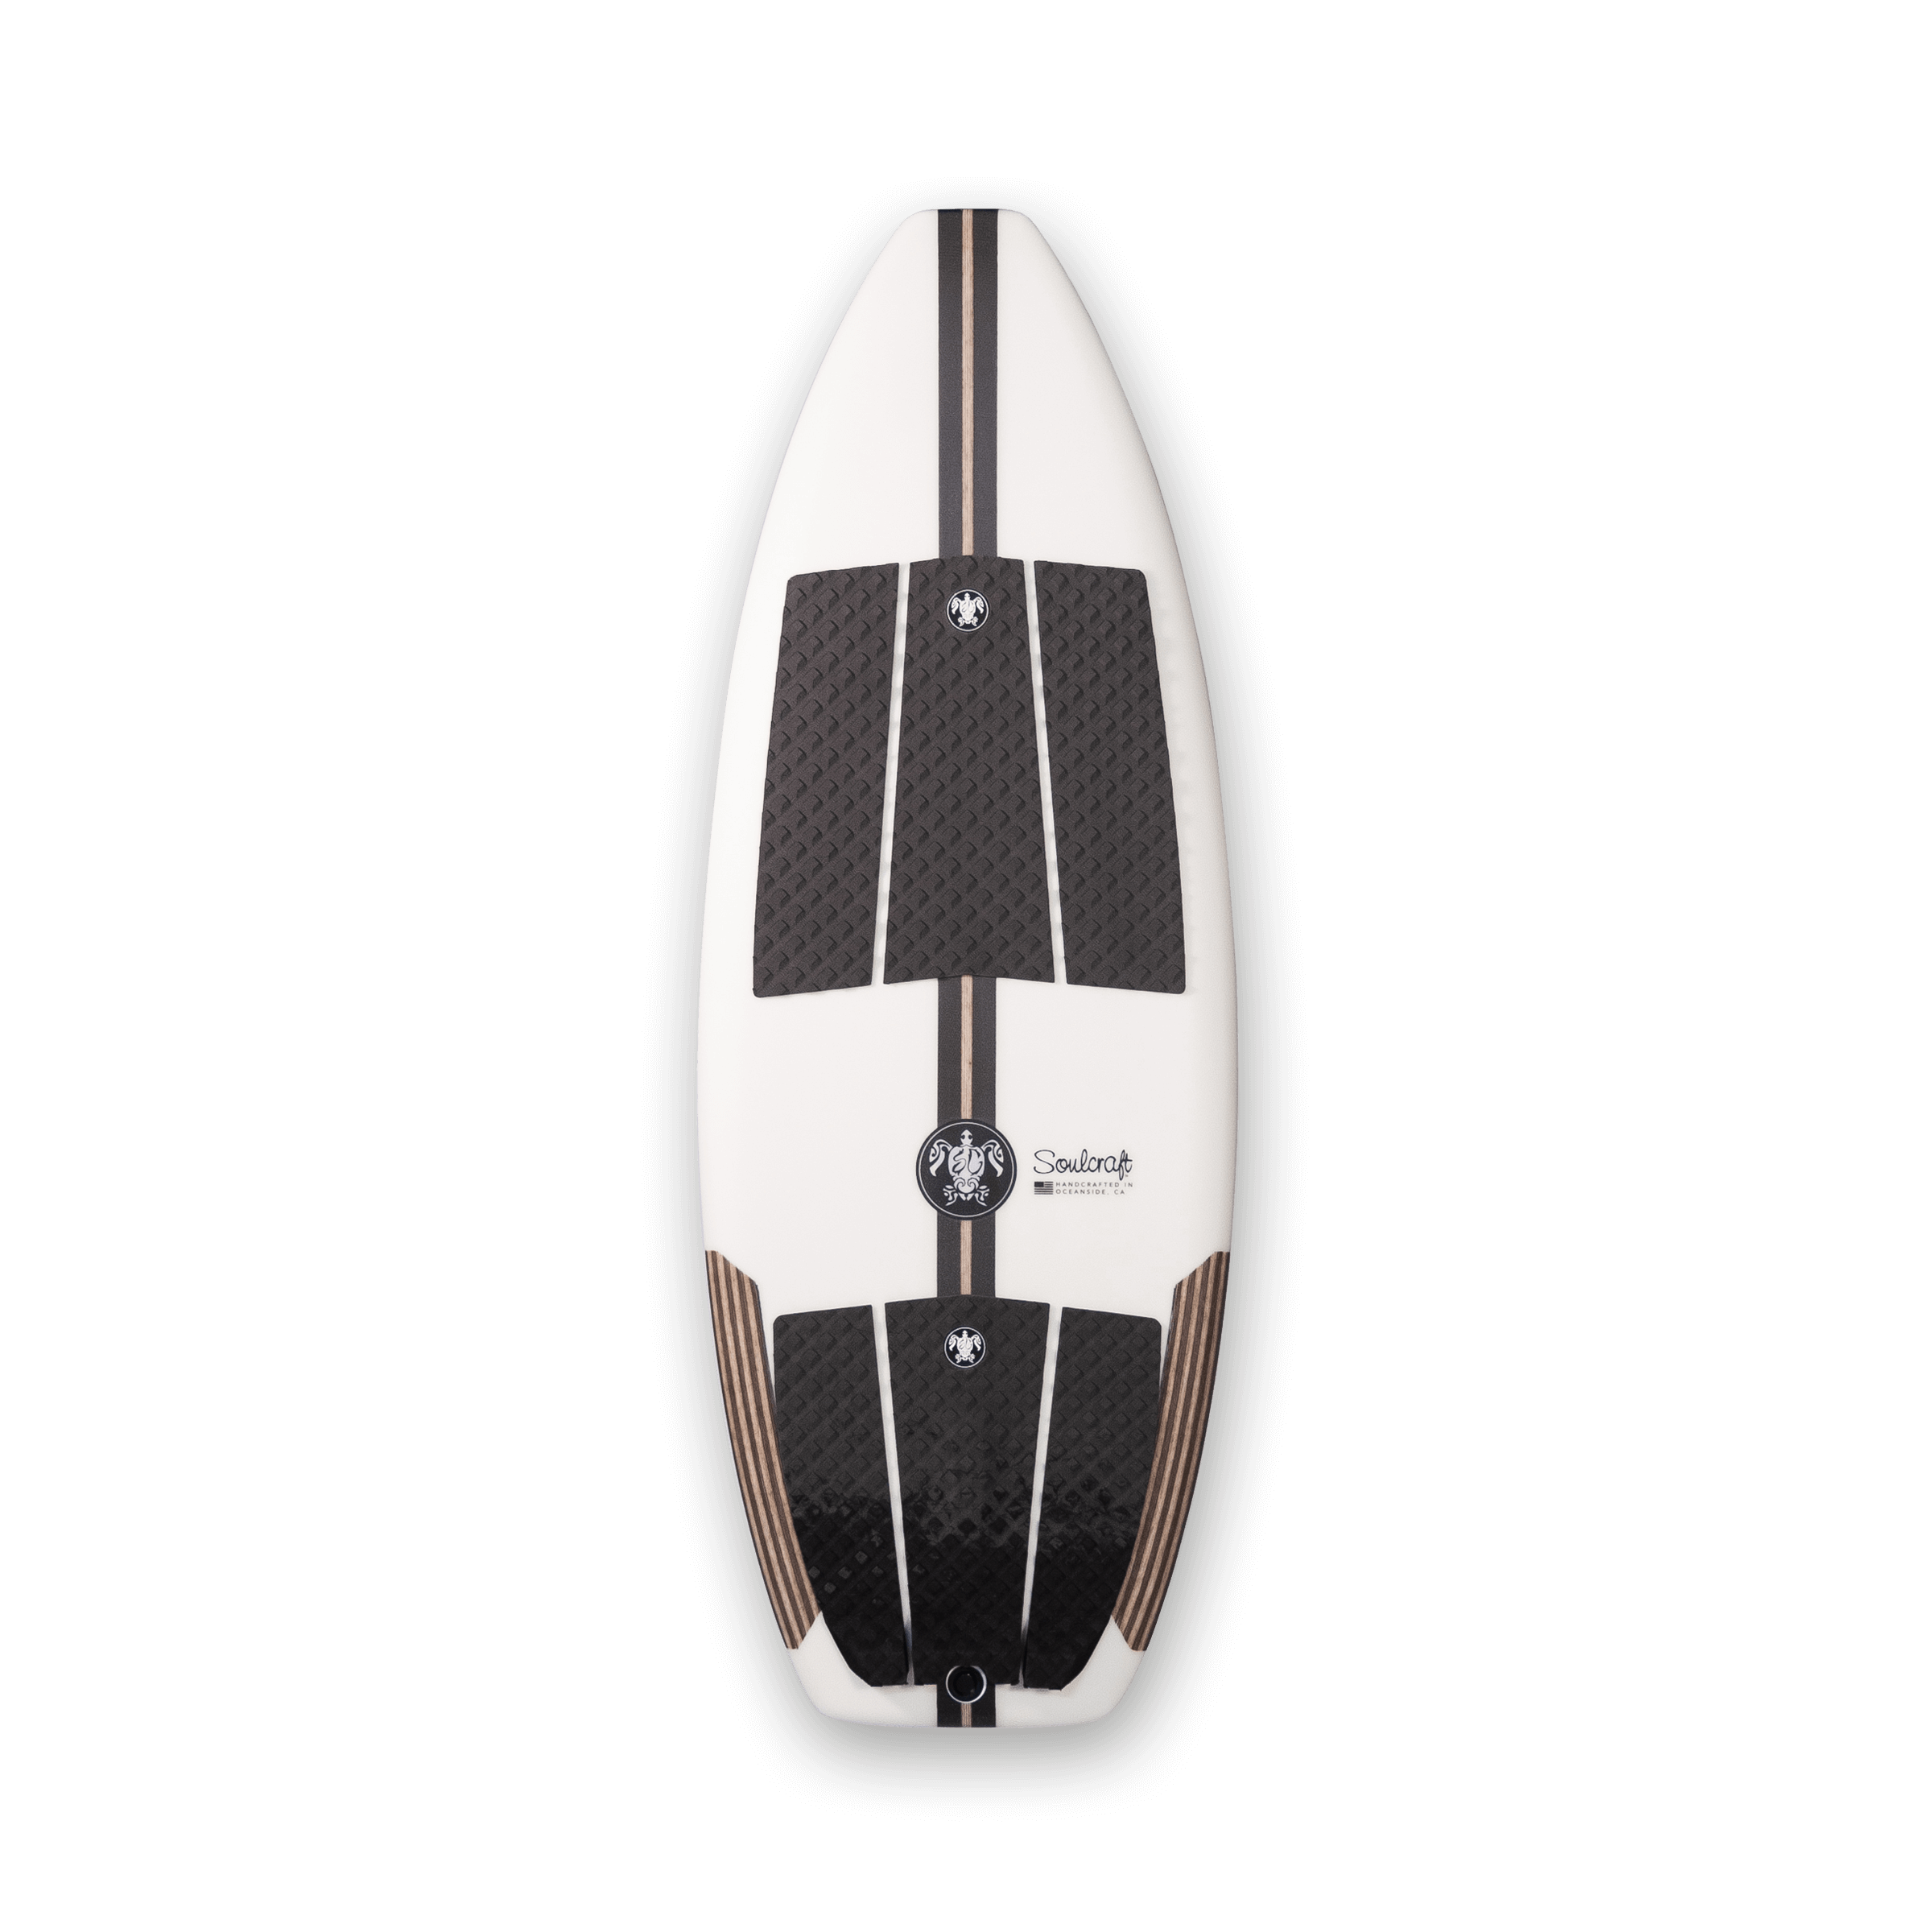 A Soulcraft M2-R wakesurf board, designed for performance, on a black background.